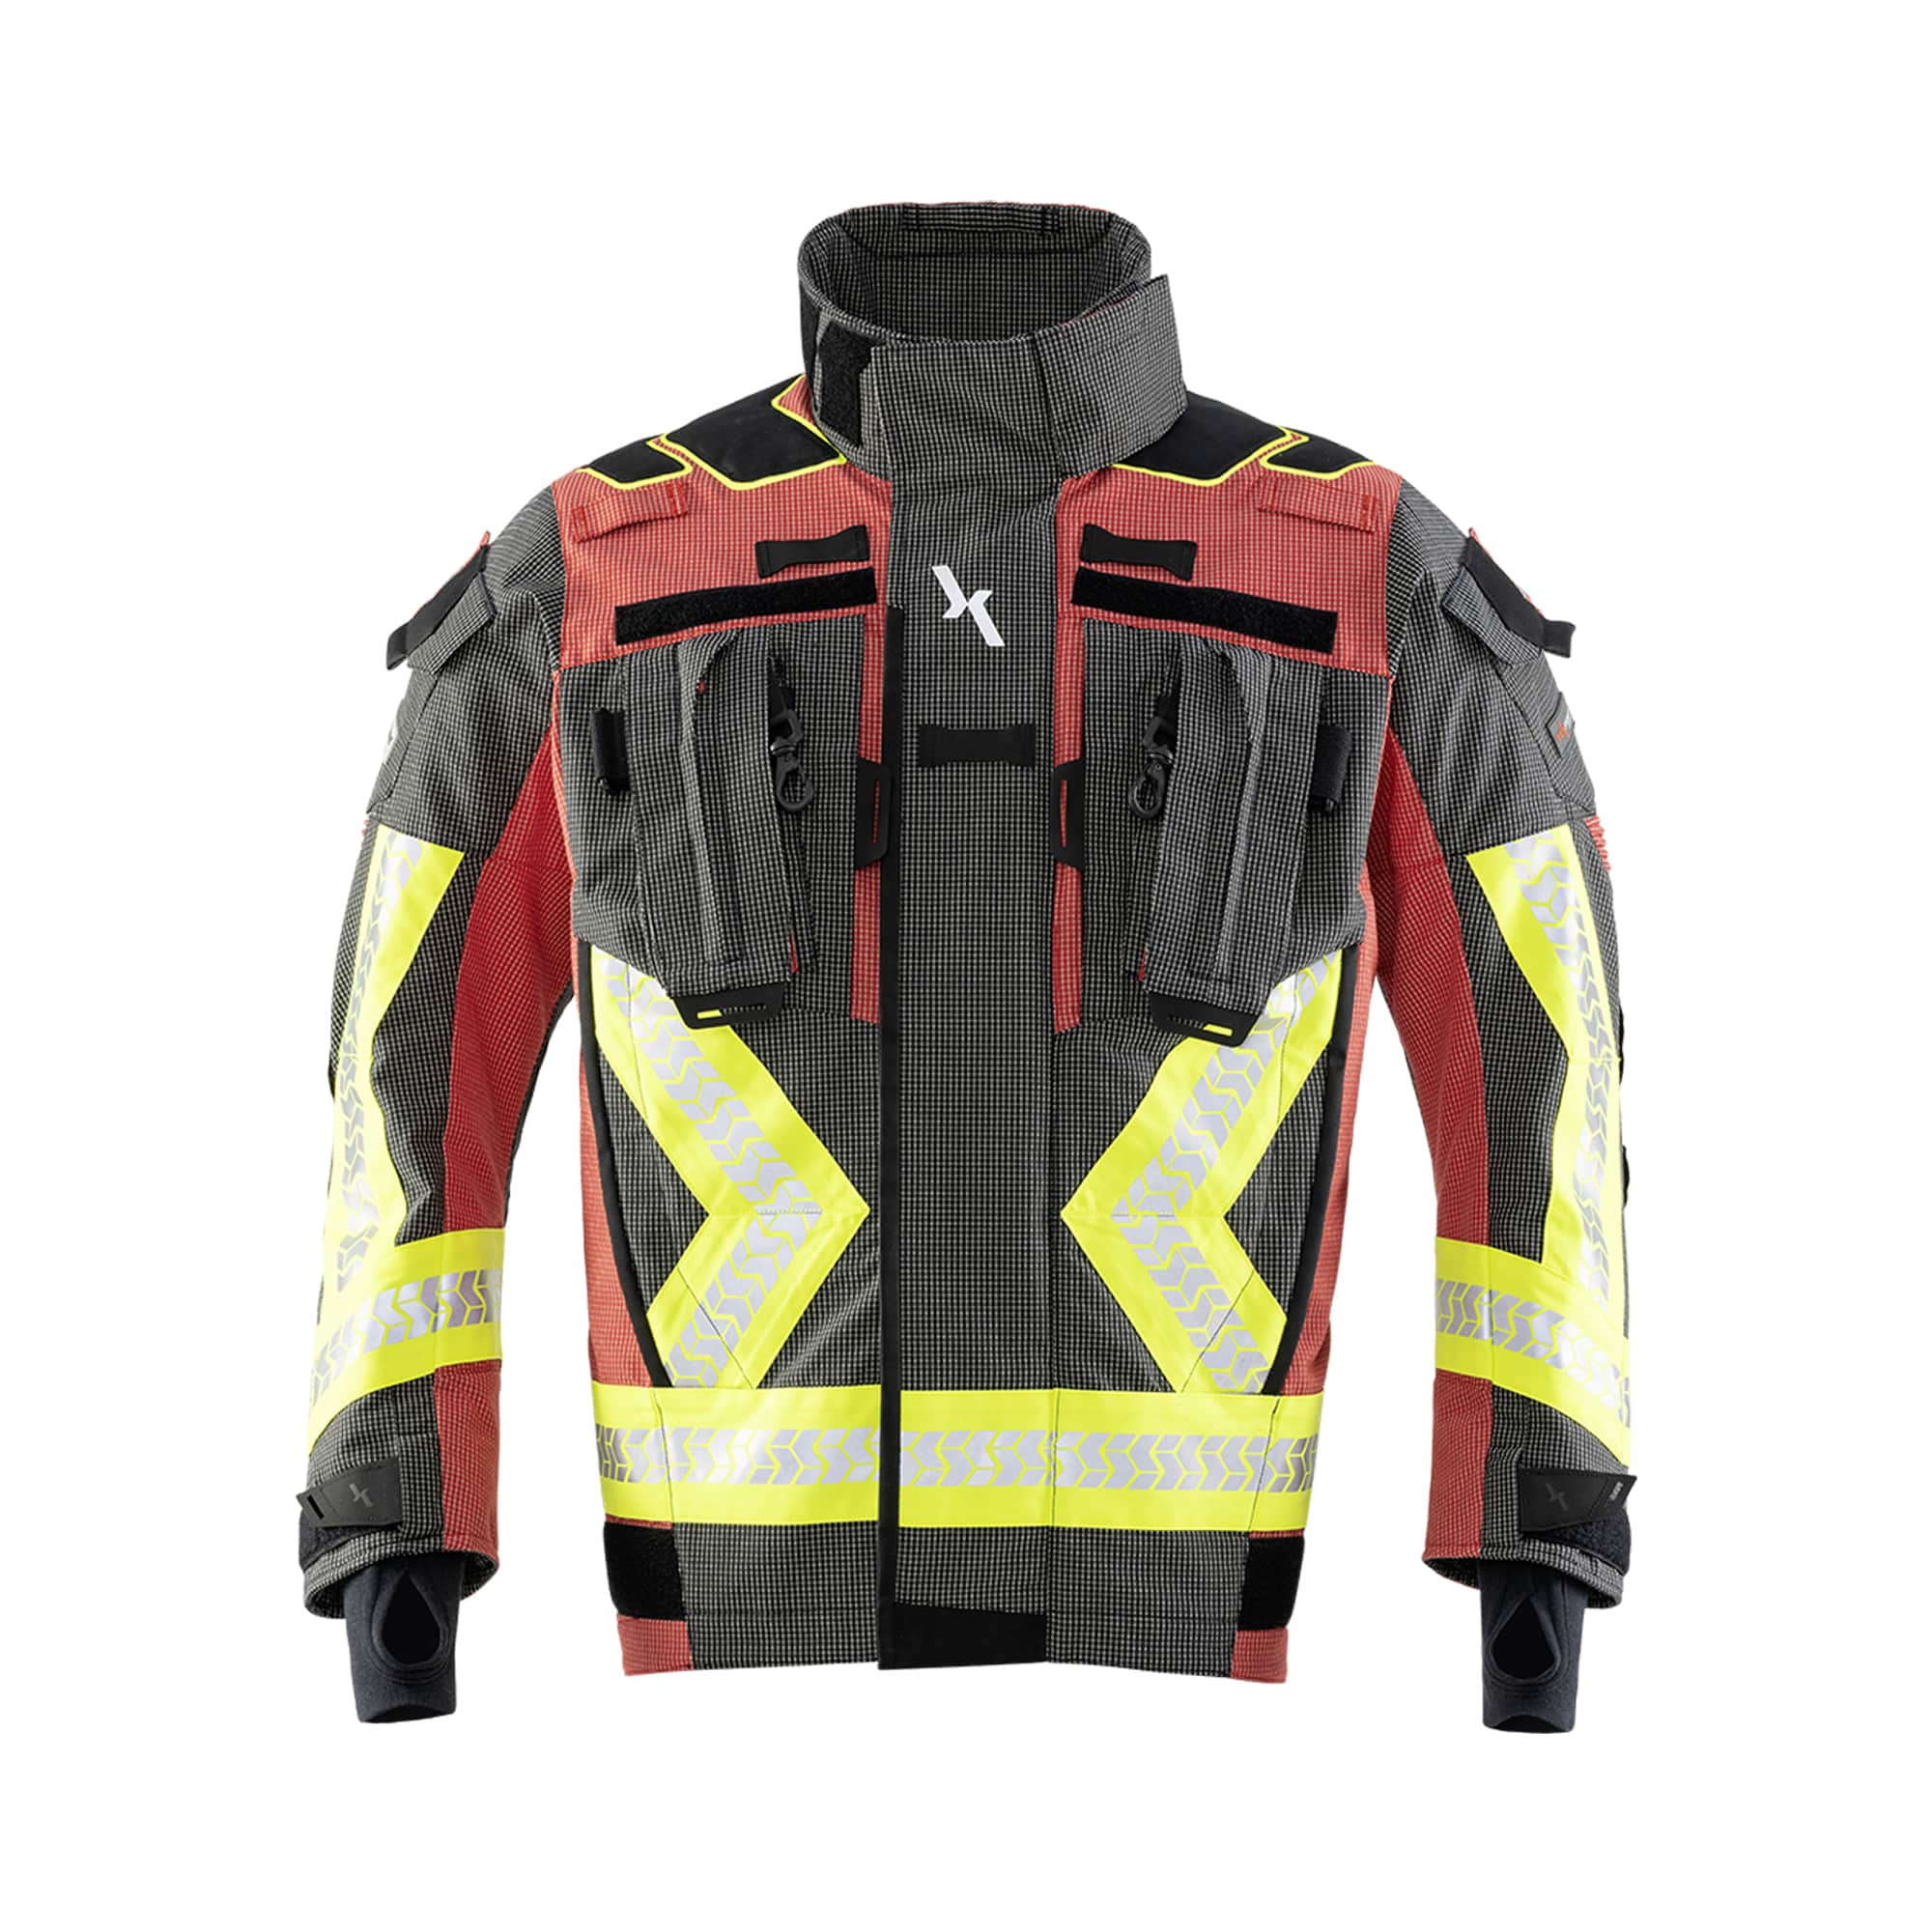 Firefighting protective suit Fire X-Flash